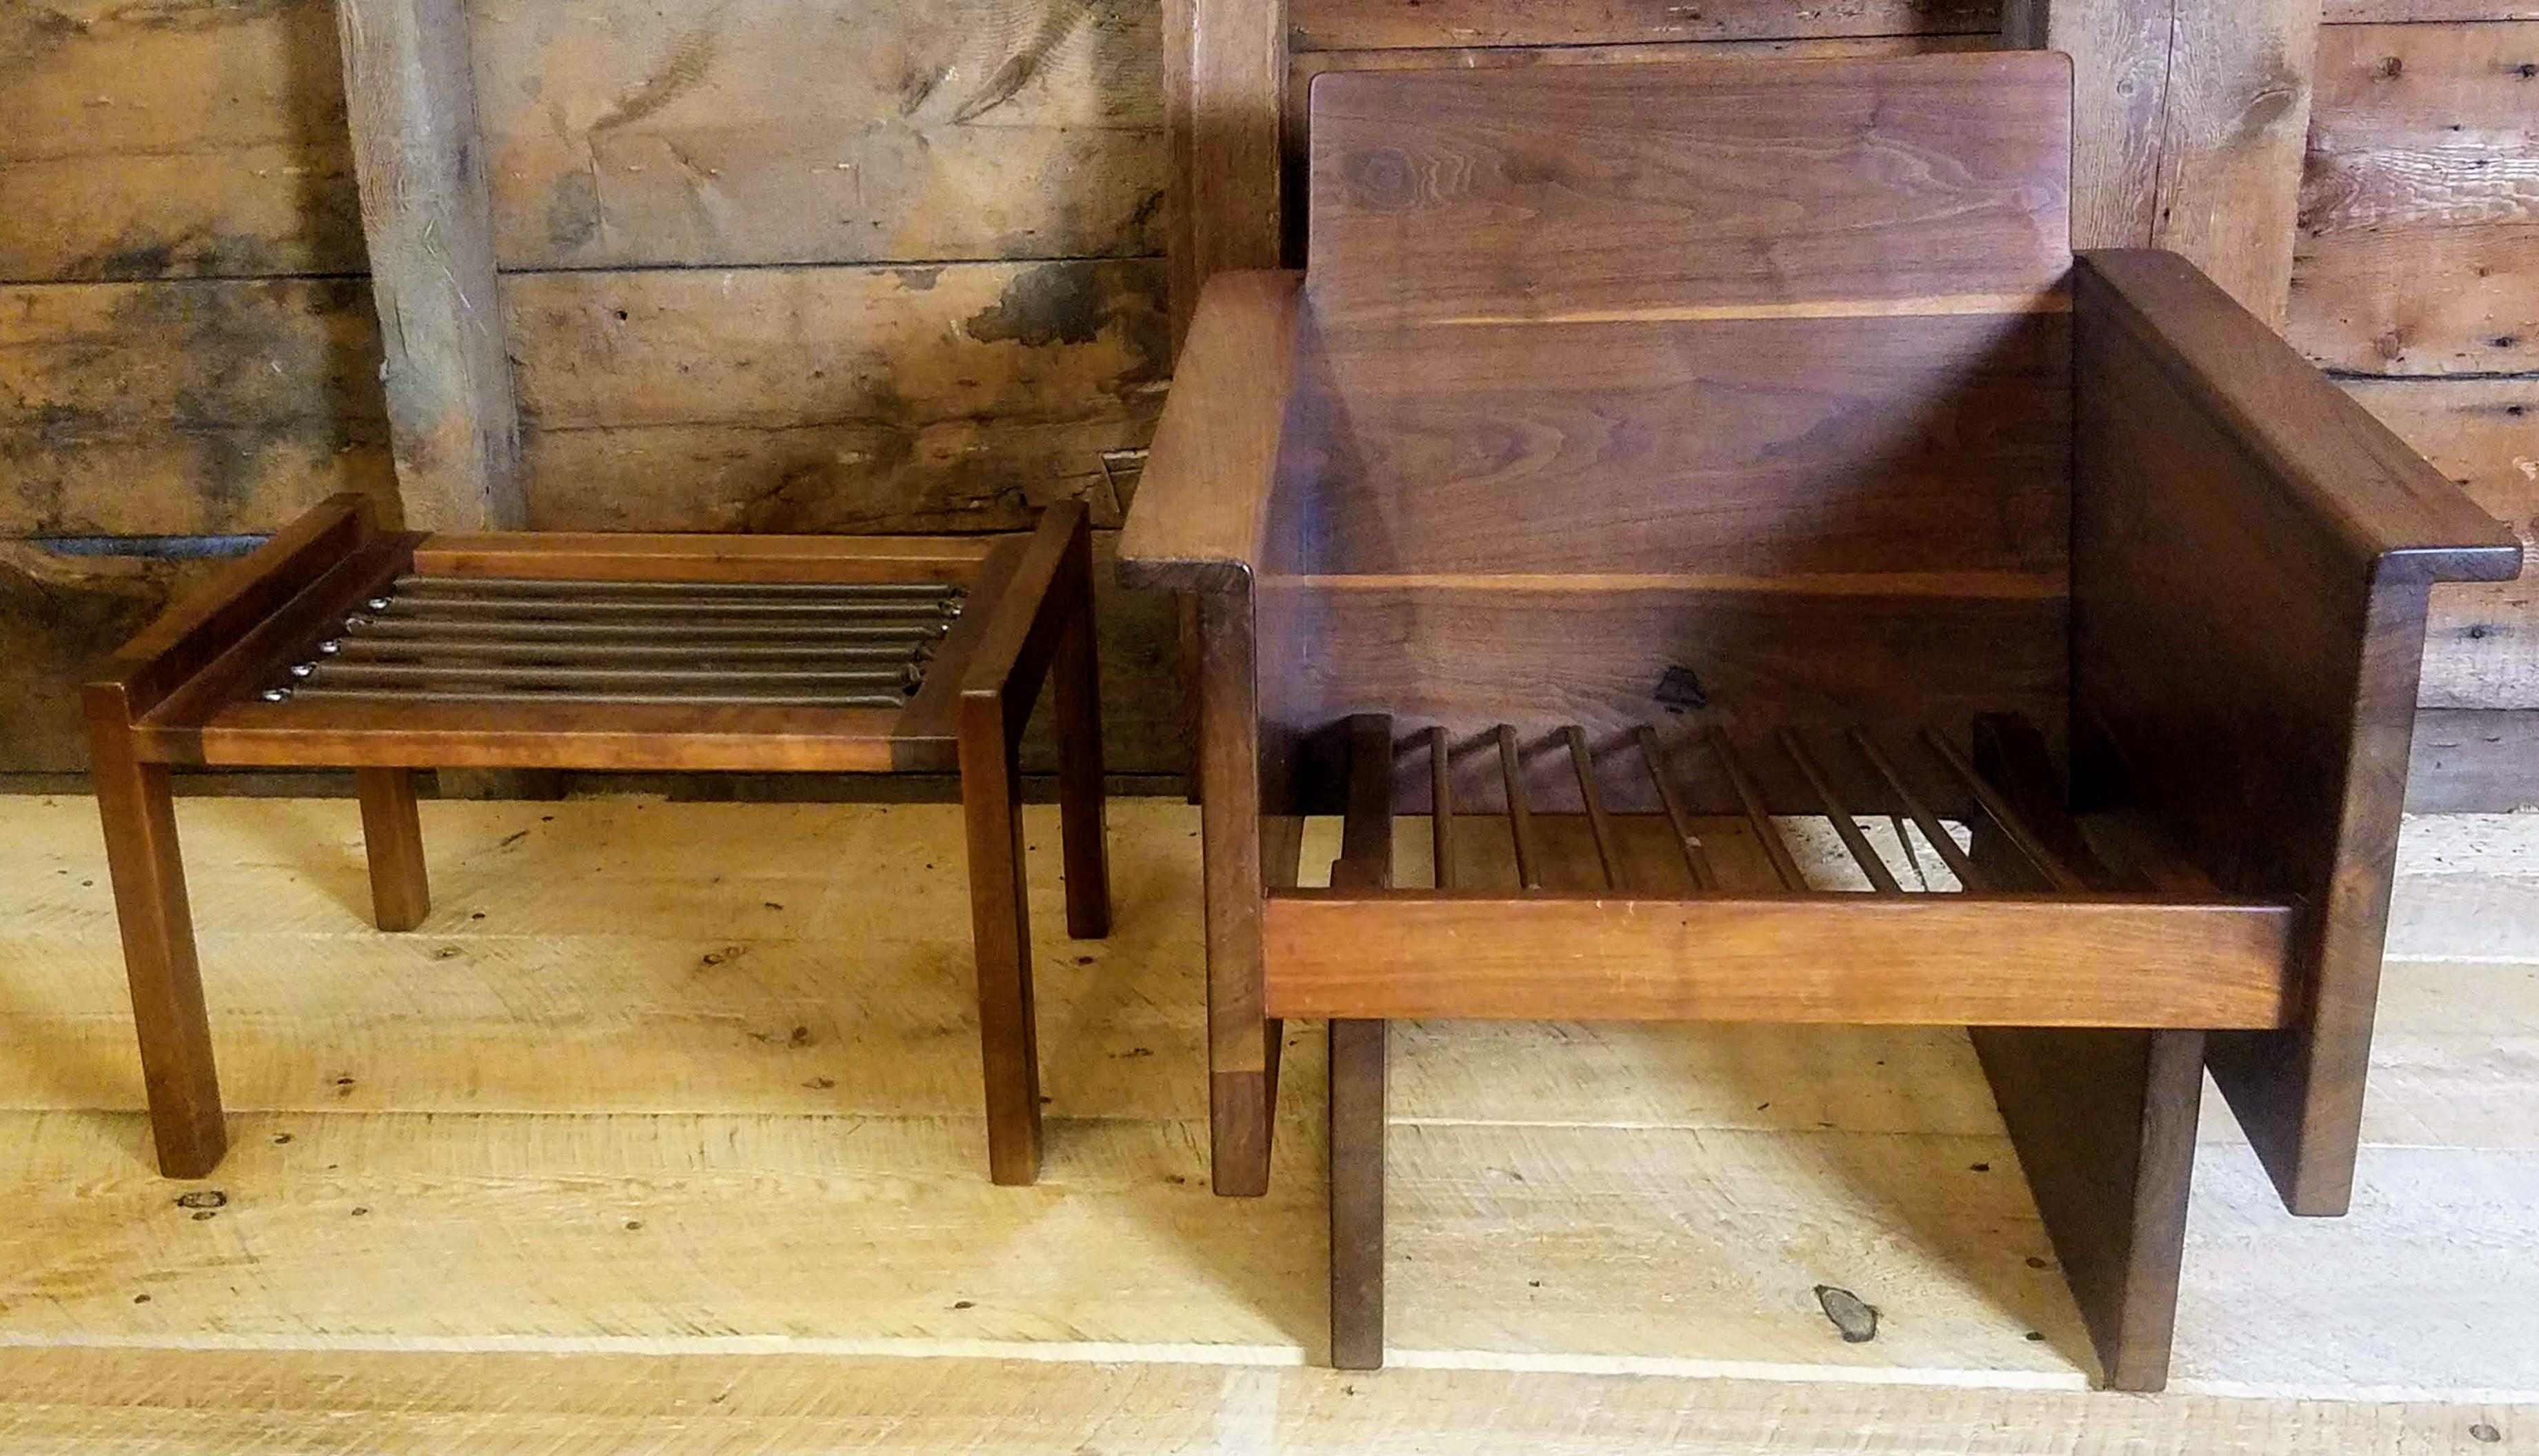 Arden Riddle Lounge Chair and Ottoman Studio Craft, 1979 1